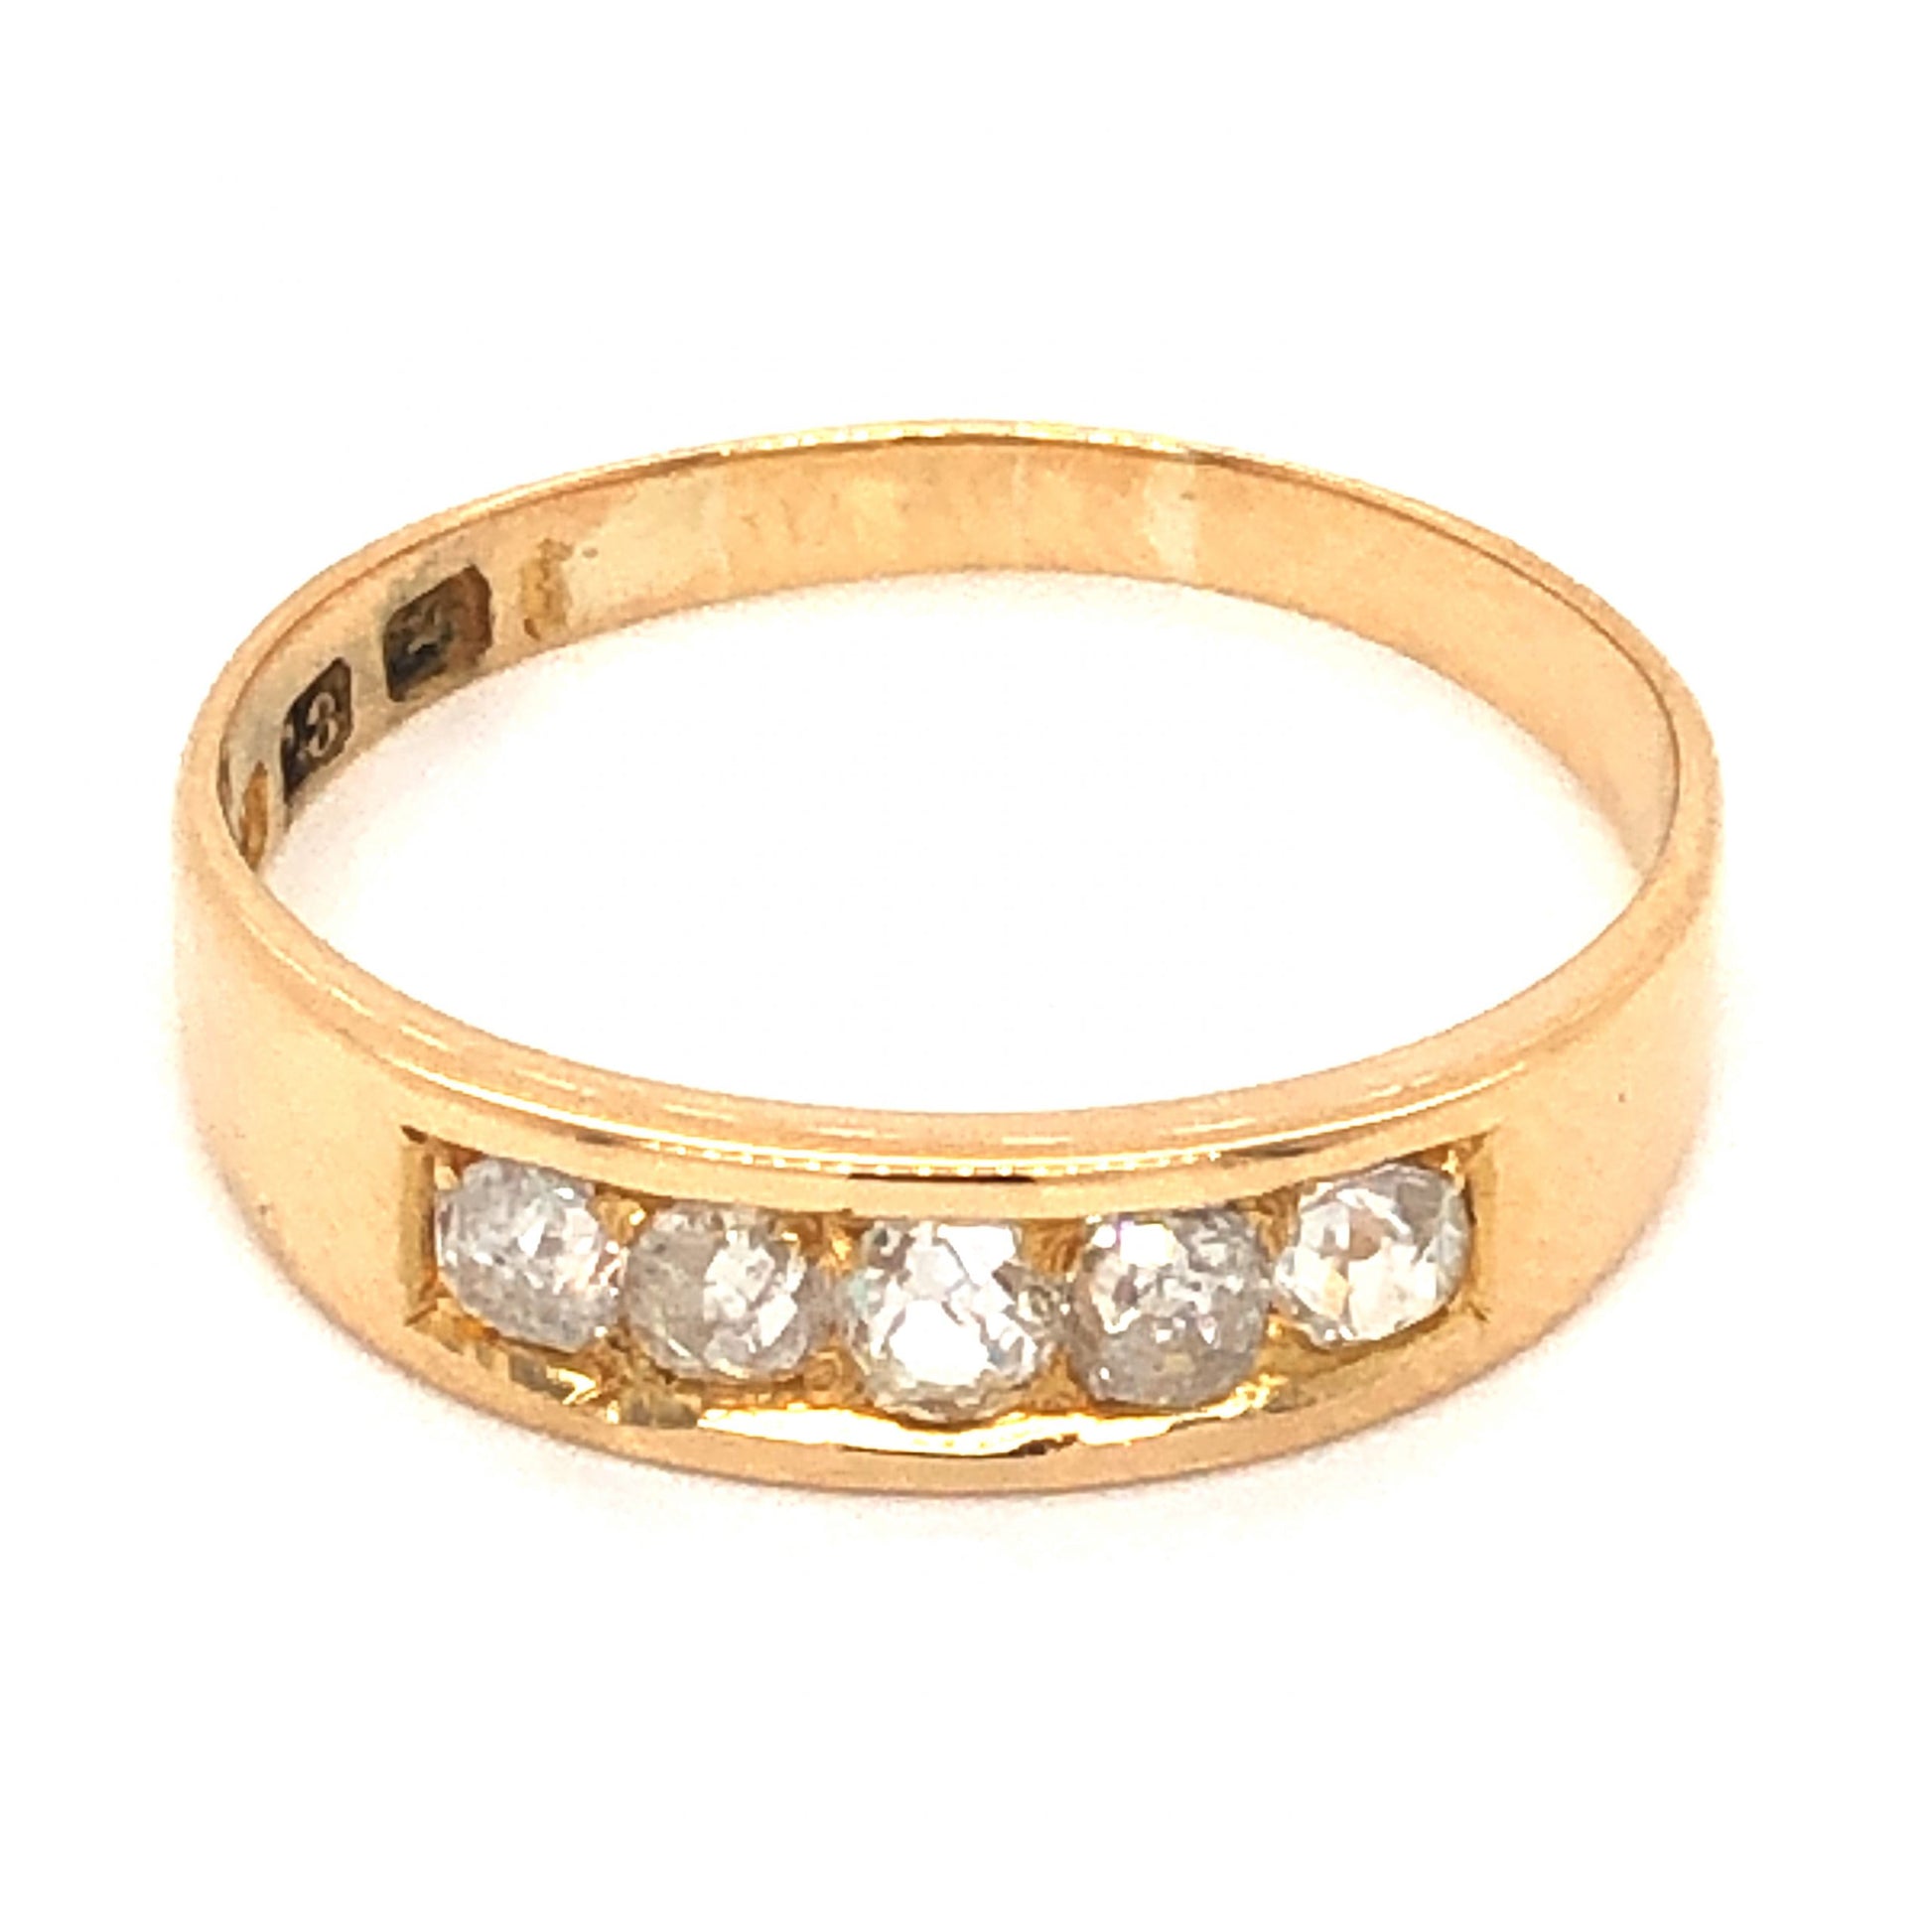 .65 Vintage Victorian Diamond Band in 18K Yellow GoldComposition: Platinum Ring Size: 7.75 Total Diamond Weight: .65ct Total Gram Weight: 2.6 g Inscription: L&L 18
      